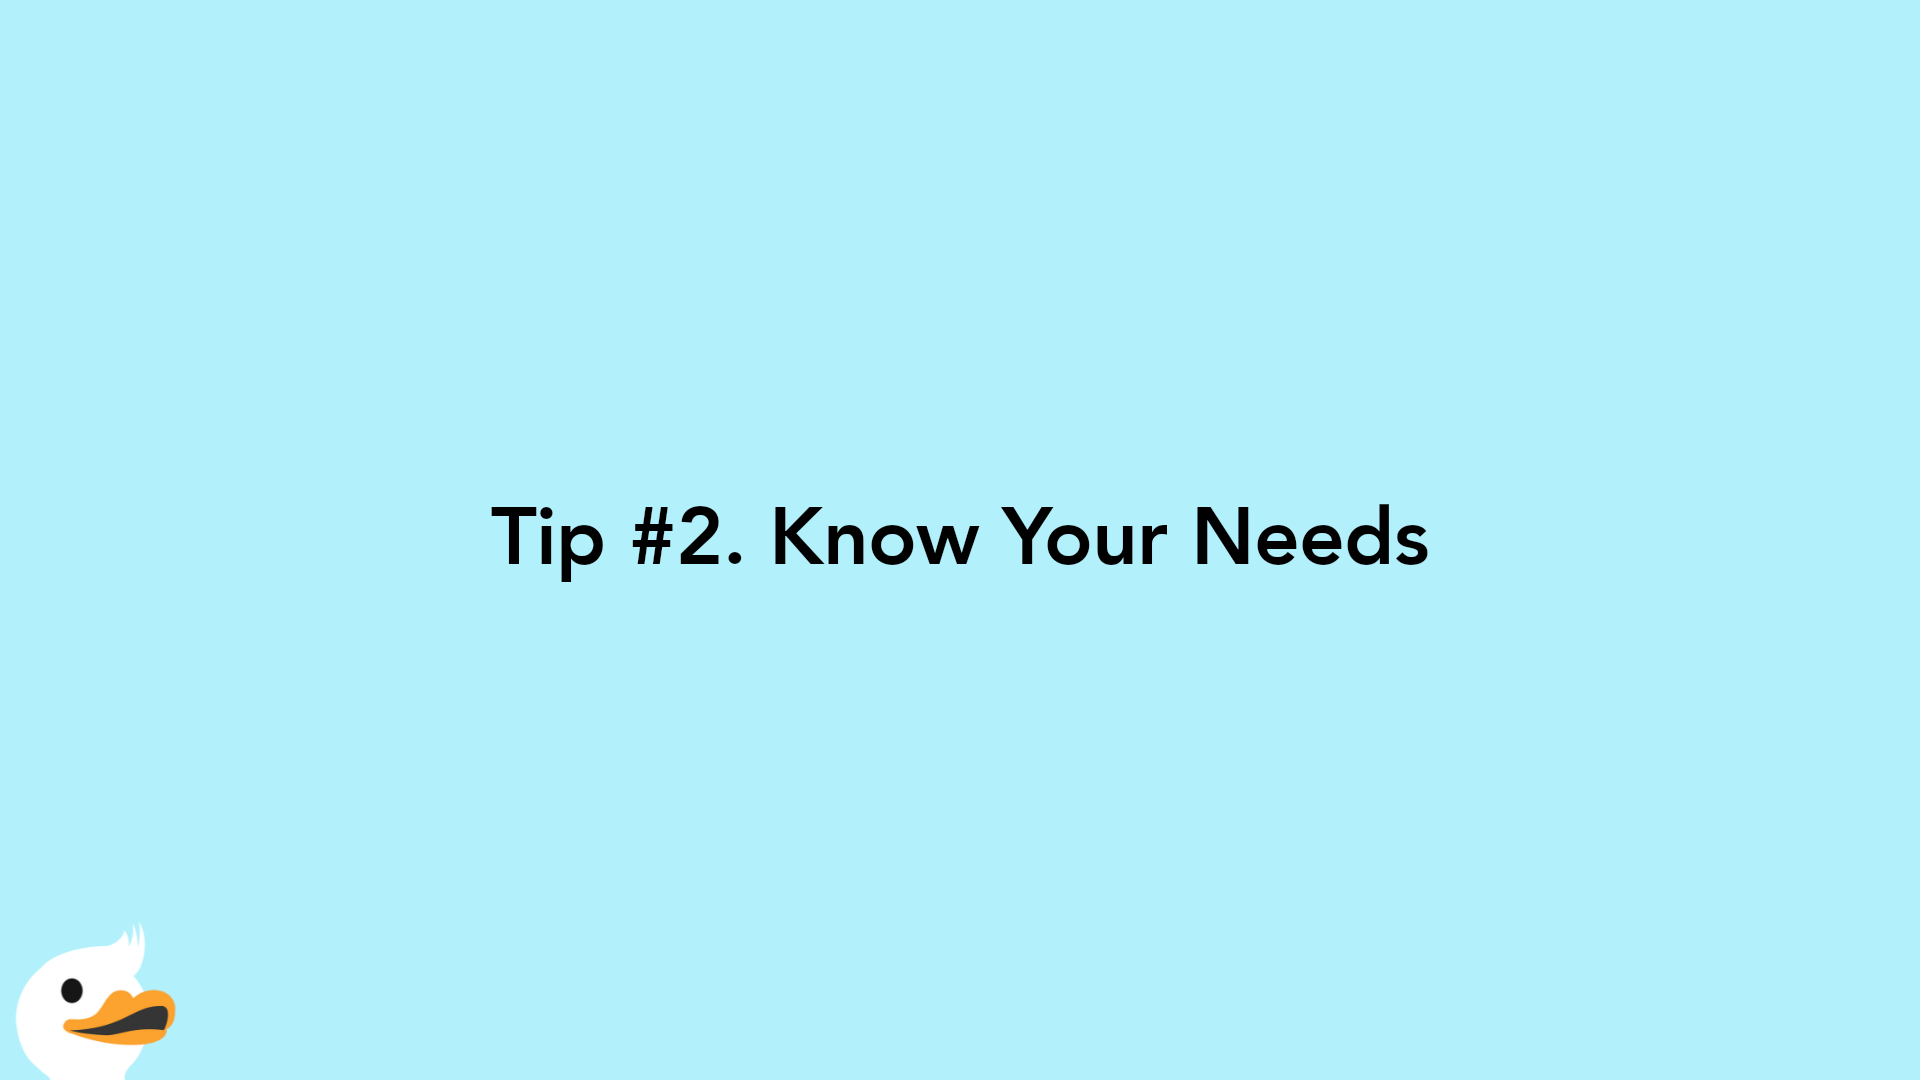 Tip #2. Know Your Needs